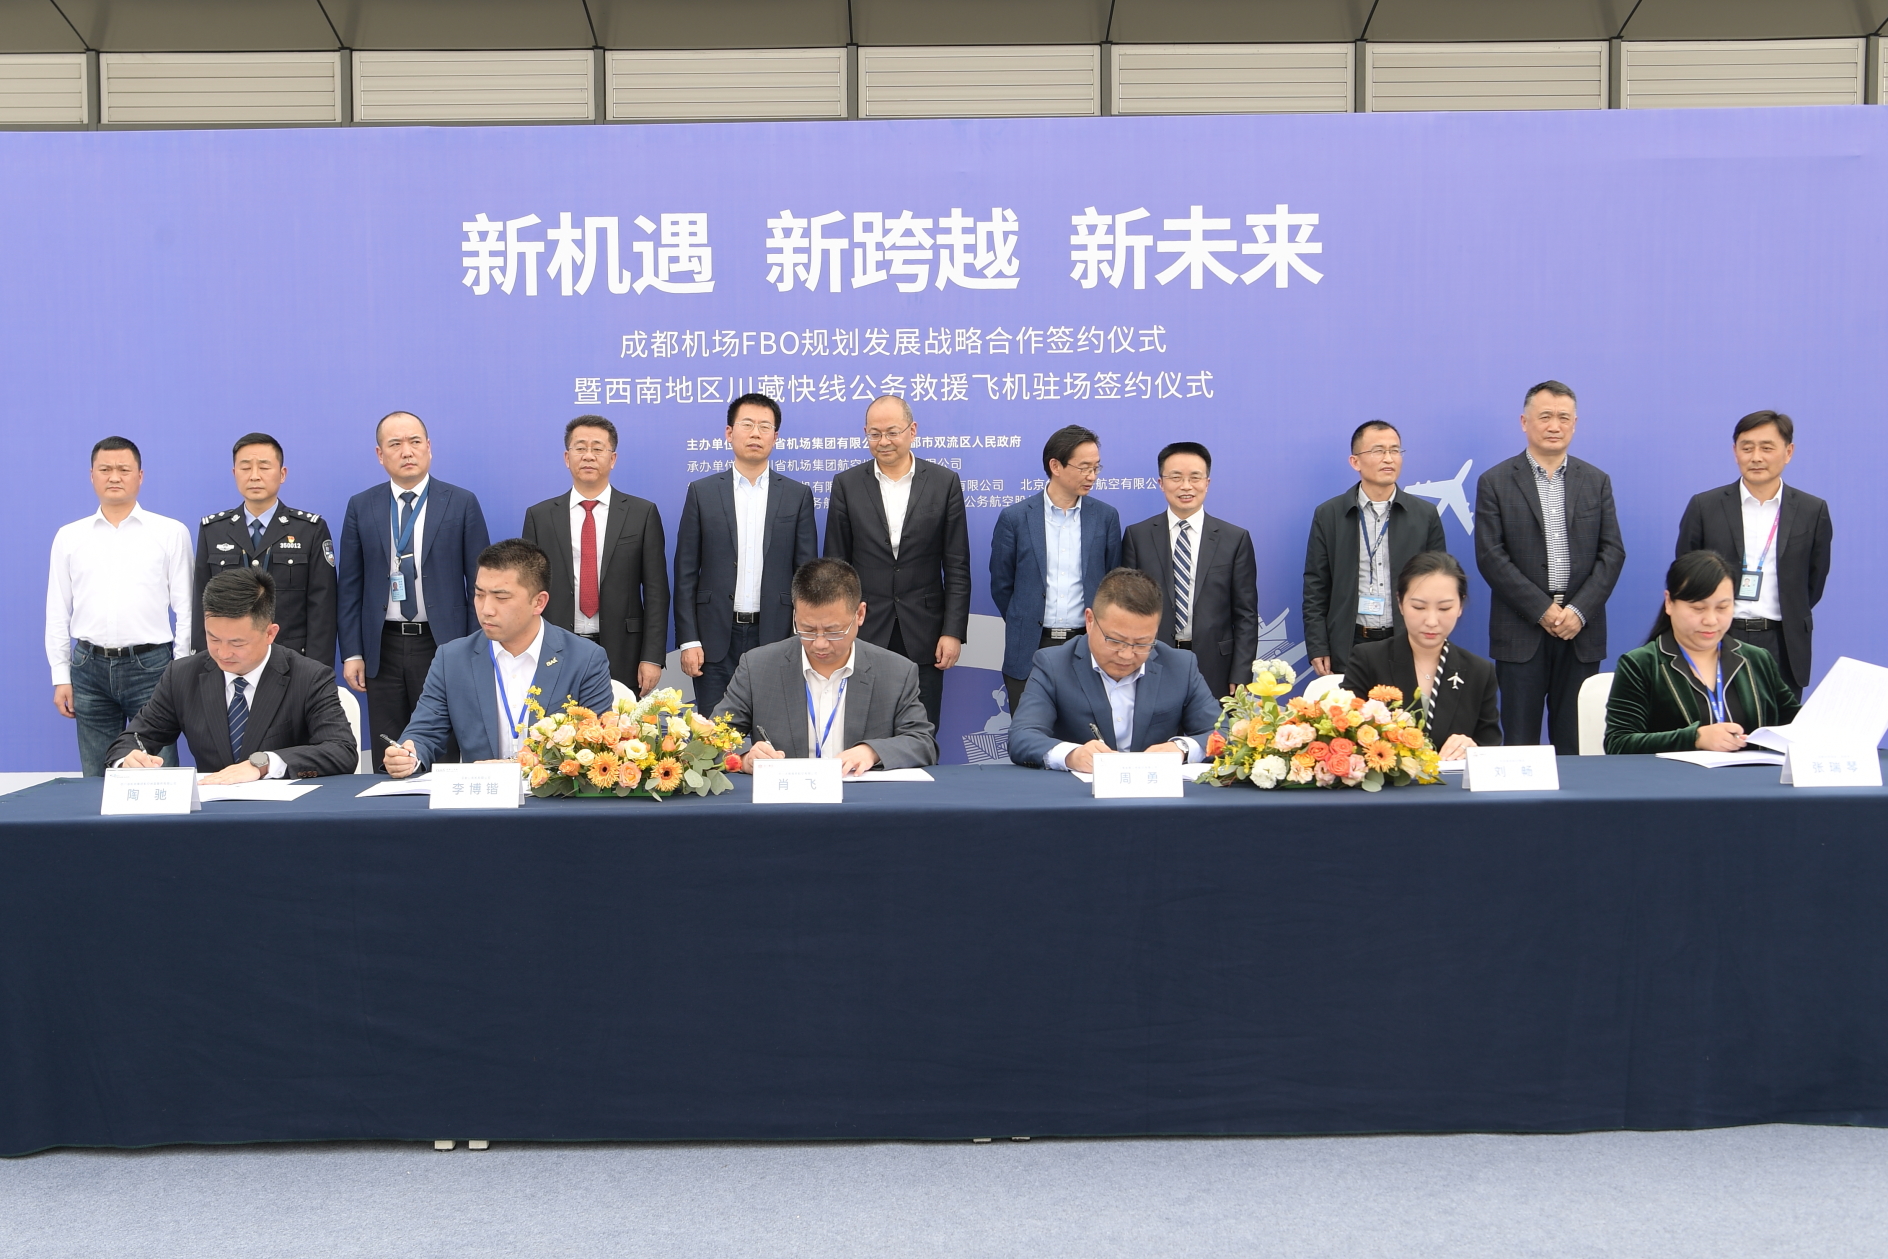 The strategic partnership signing ceremony between Sino Jet, Sichuan Province Airport Aviation Ground Service Company and Chengdu's Shuangliu Government. Click to enlarge.